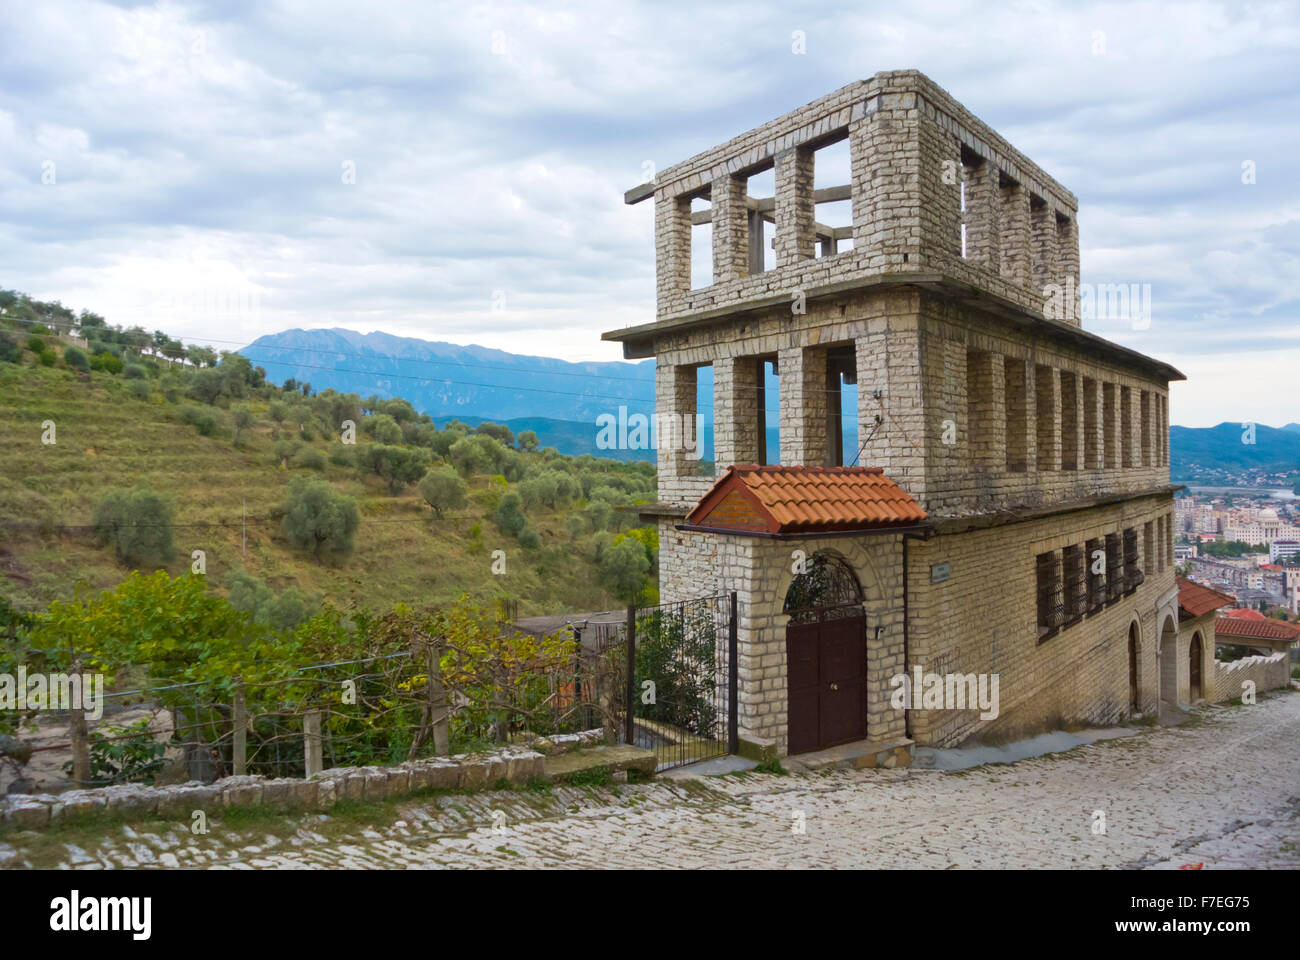 Unfinished residential building, Rruga Mihal Komnena, road to Kalaja, the castle, fortress hill, Berat, Albania Stock Photo